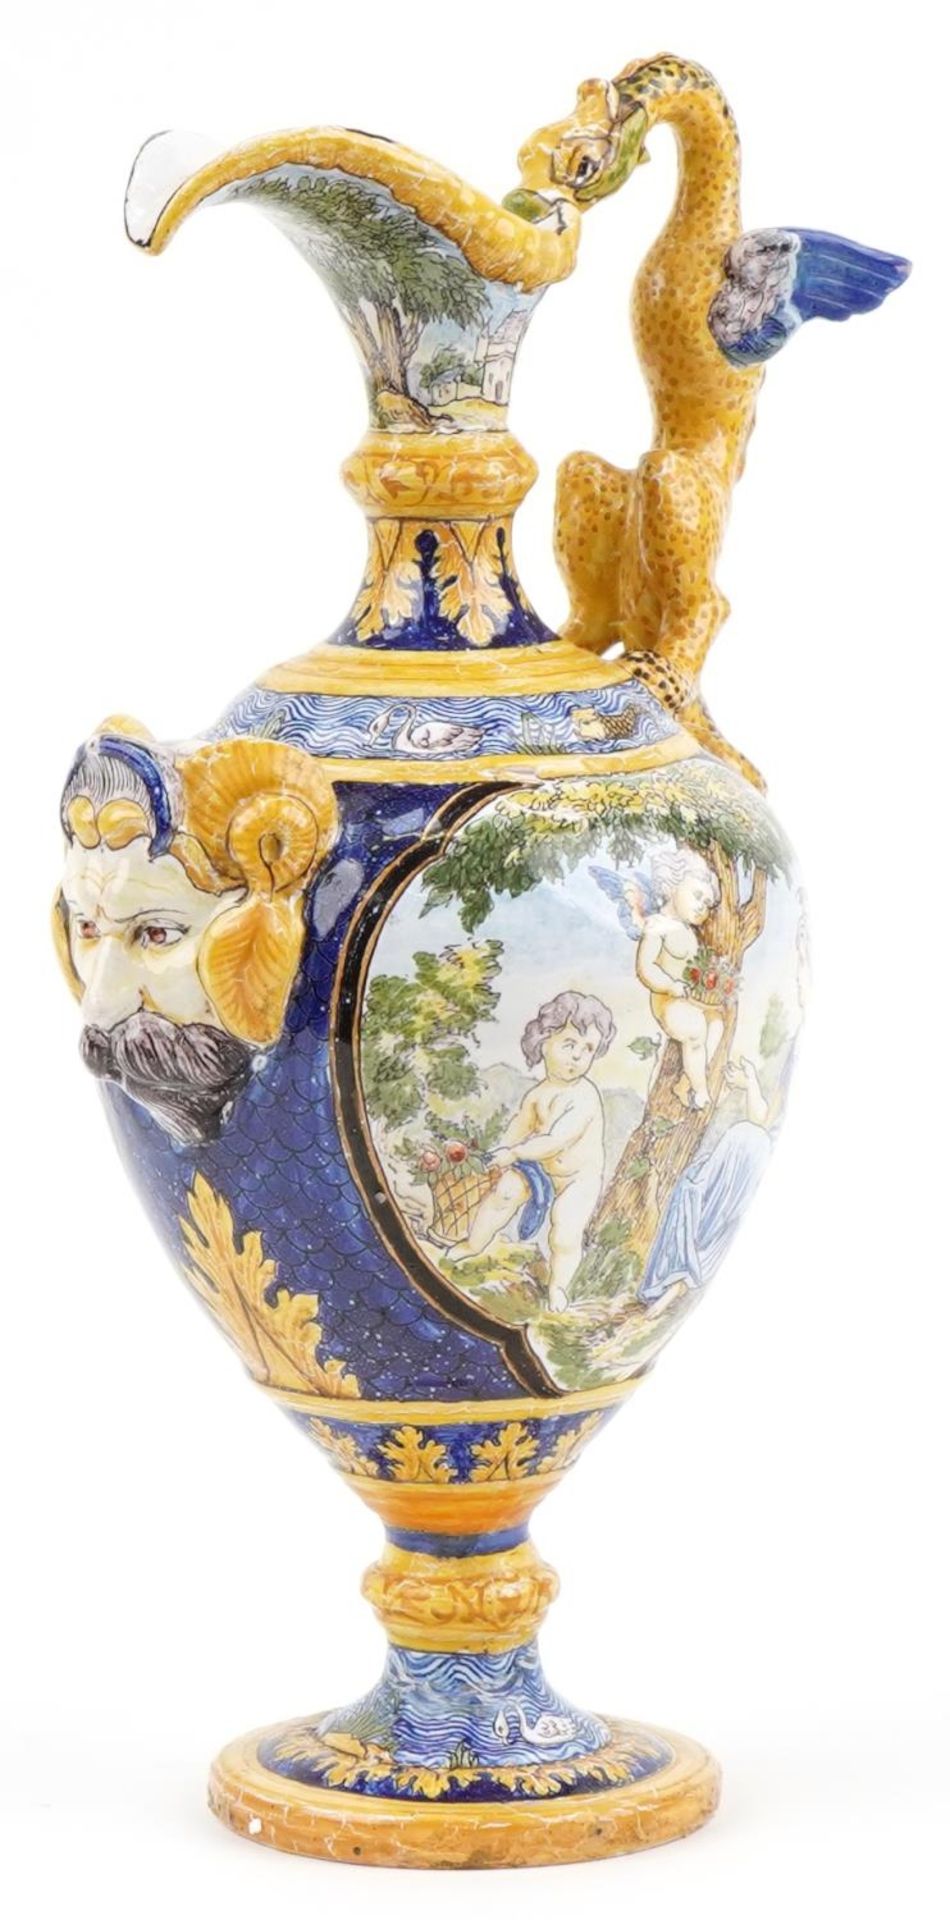 Attributed to Cantagalli, Italian Maiolica ewer with mythical handle and mask, hand painted with